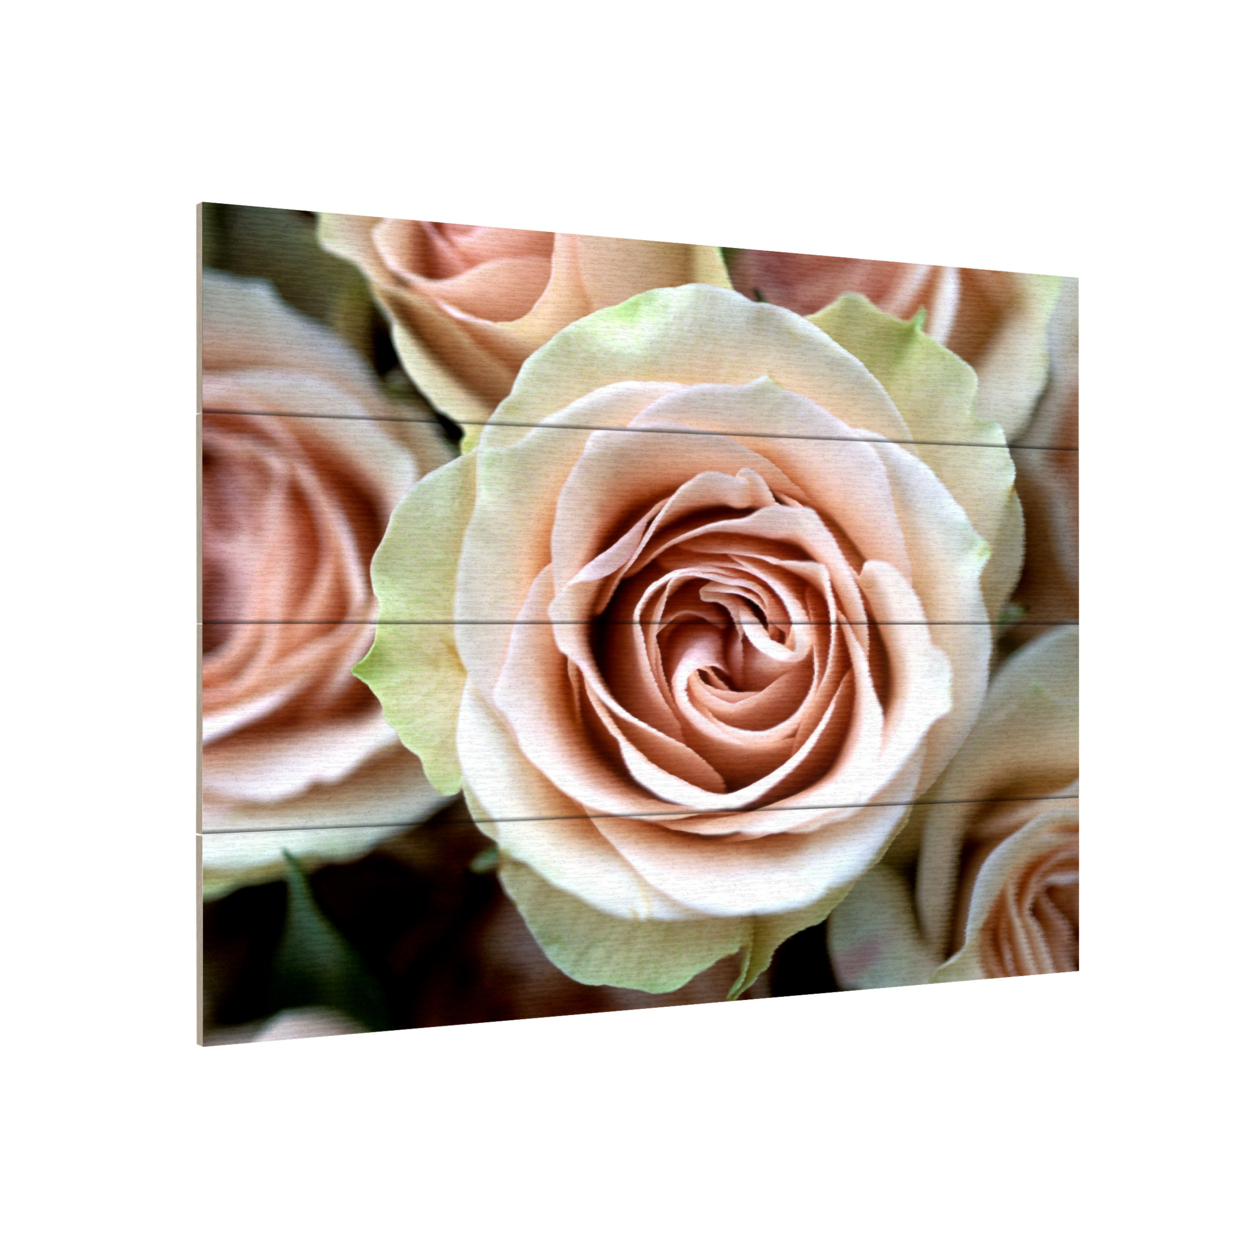 Wall Art 12 X 16 Inches Titled Pale Pink Roses Ready To Hang Printed On Wooden Planks